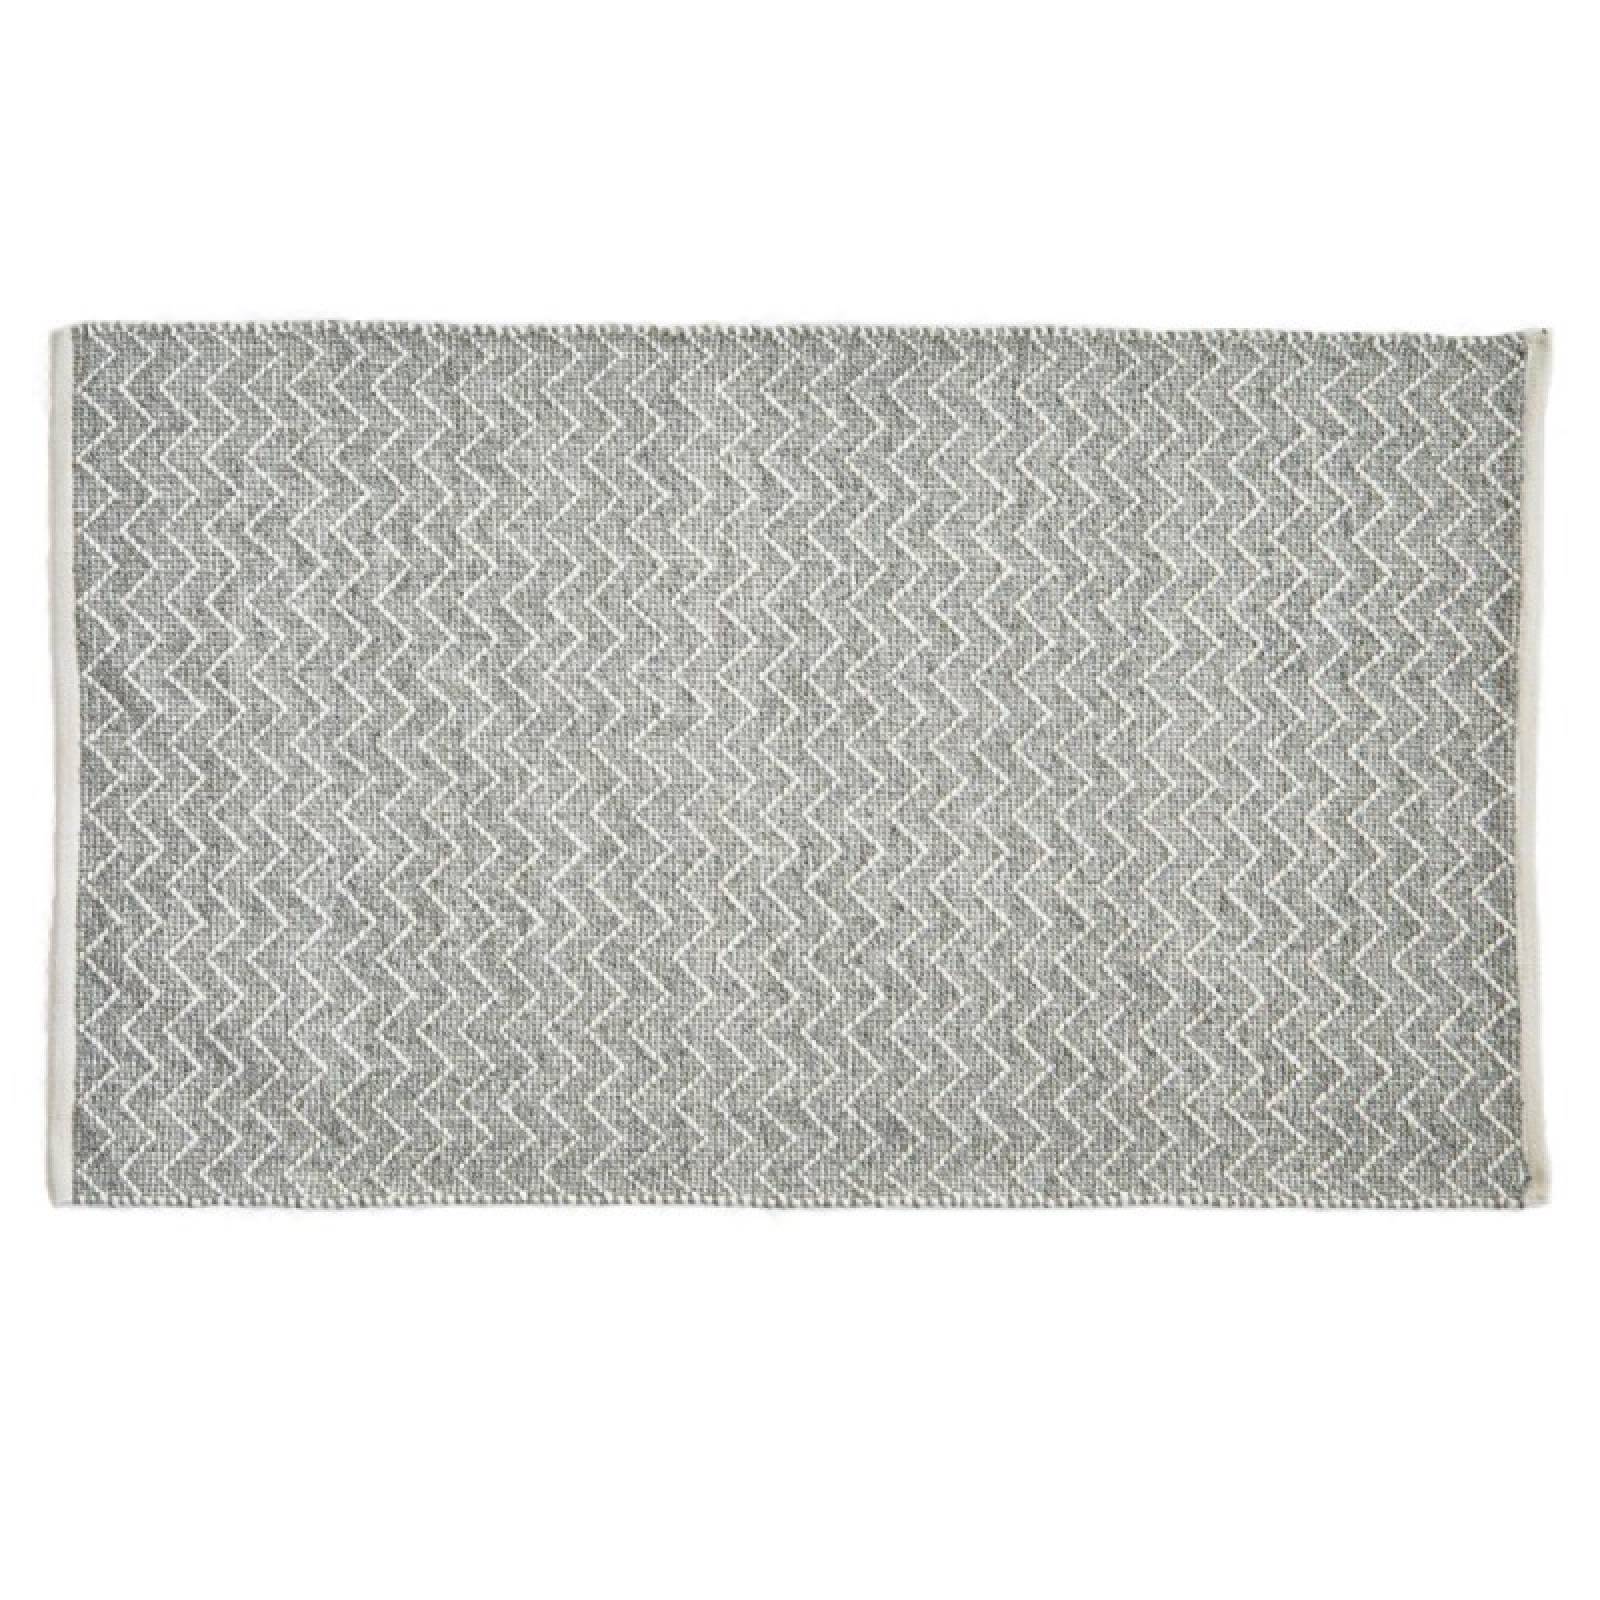 Chenille In Dove Grey 90x60cm Recycled Bottle Rug thumbnails